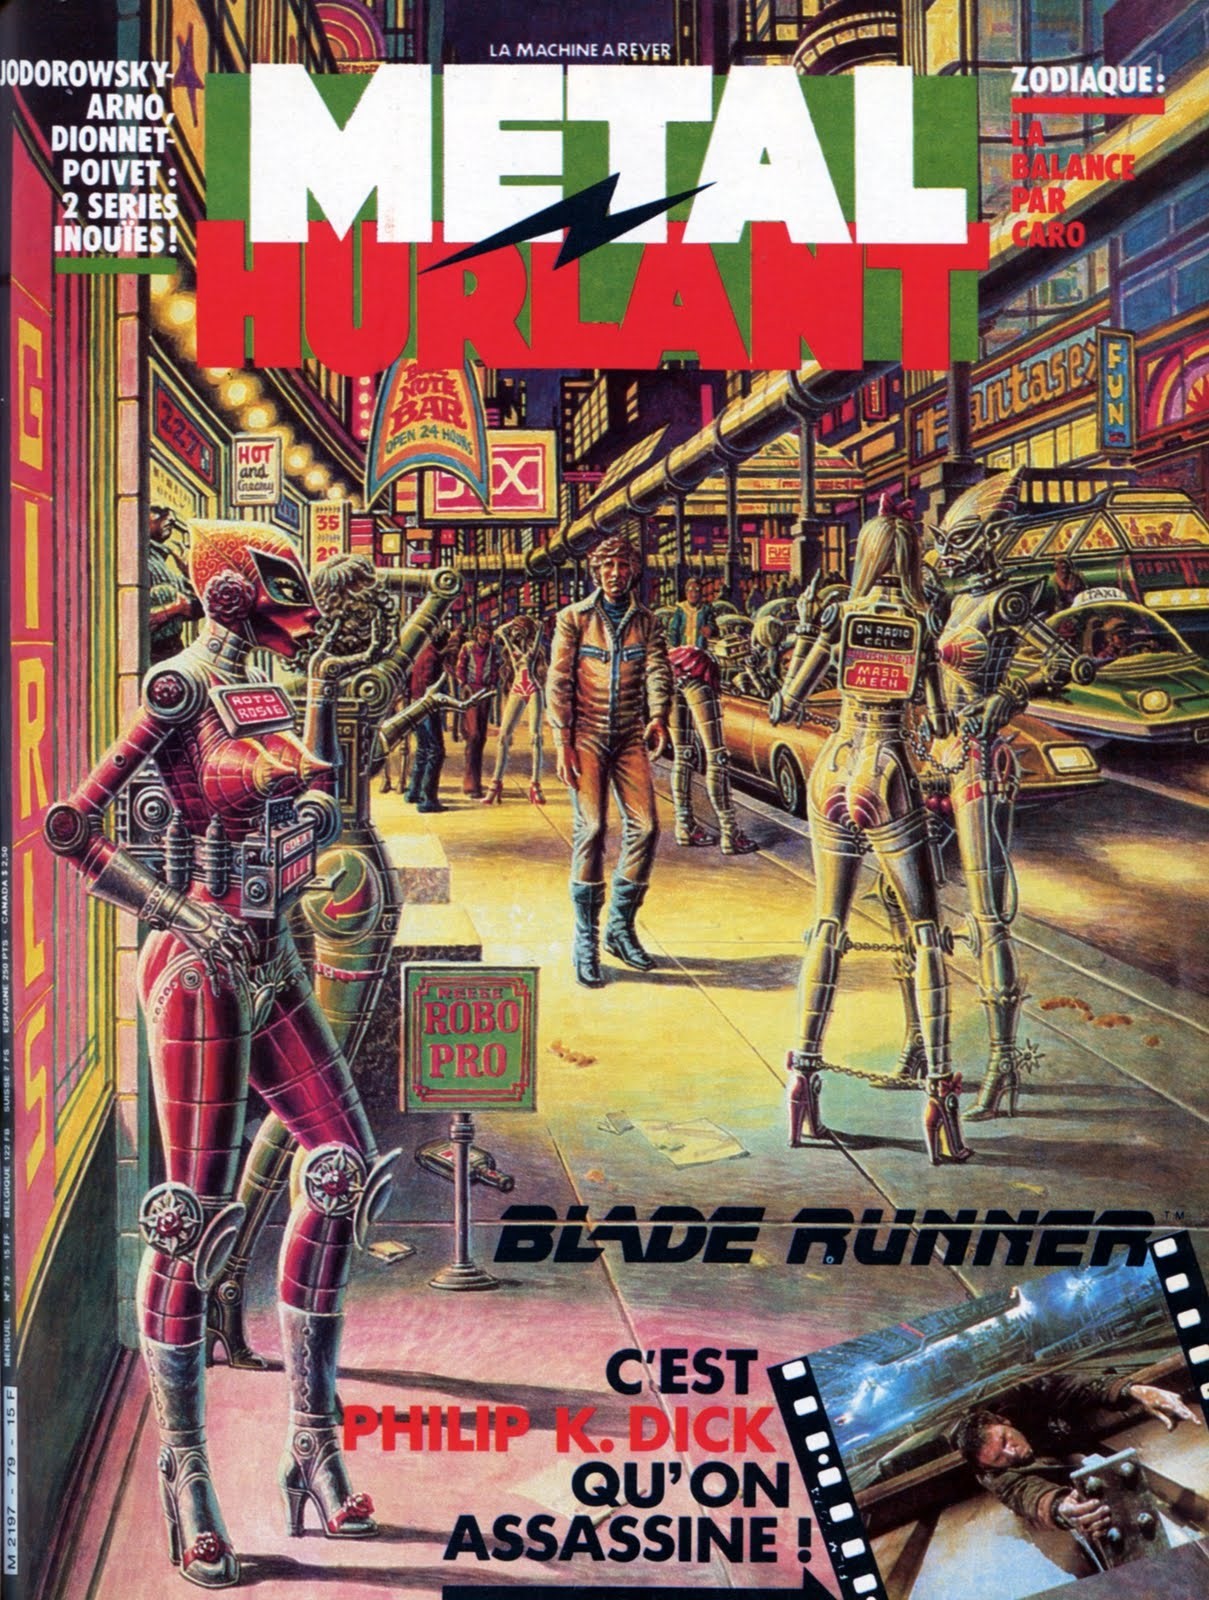 Science Fiction Erotica - The French sci-fi comic that inspired Blade Runner and Akira | Dazed